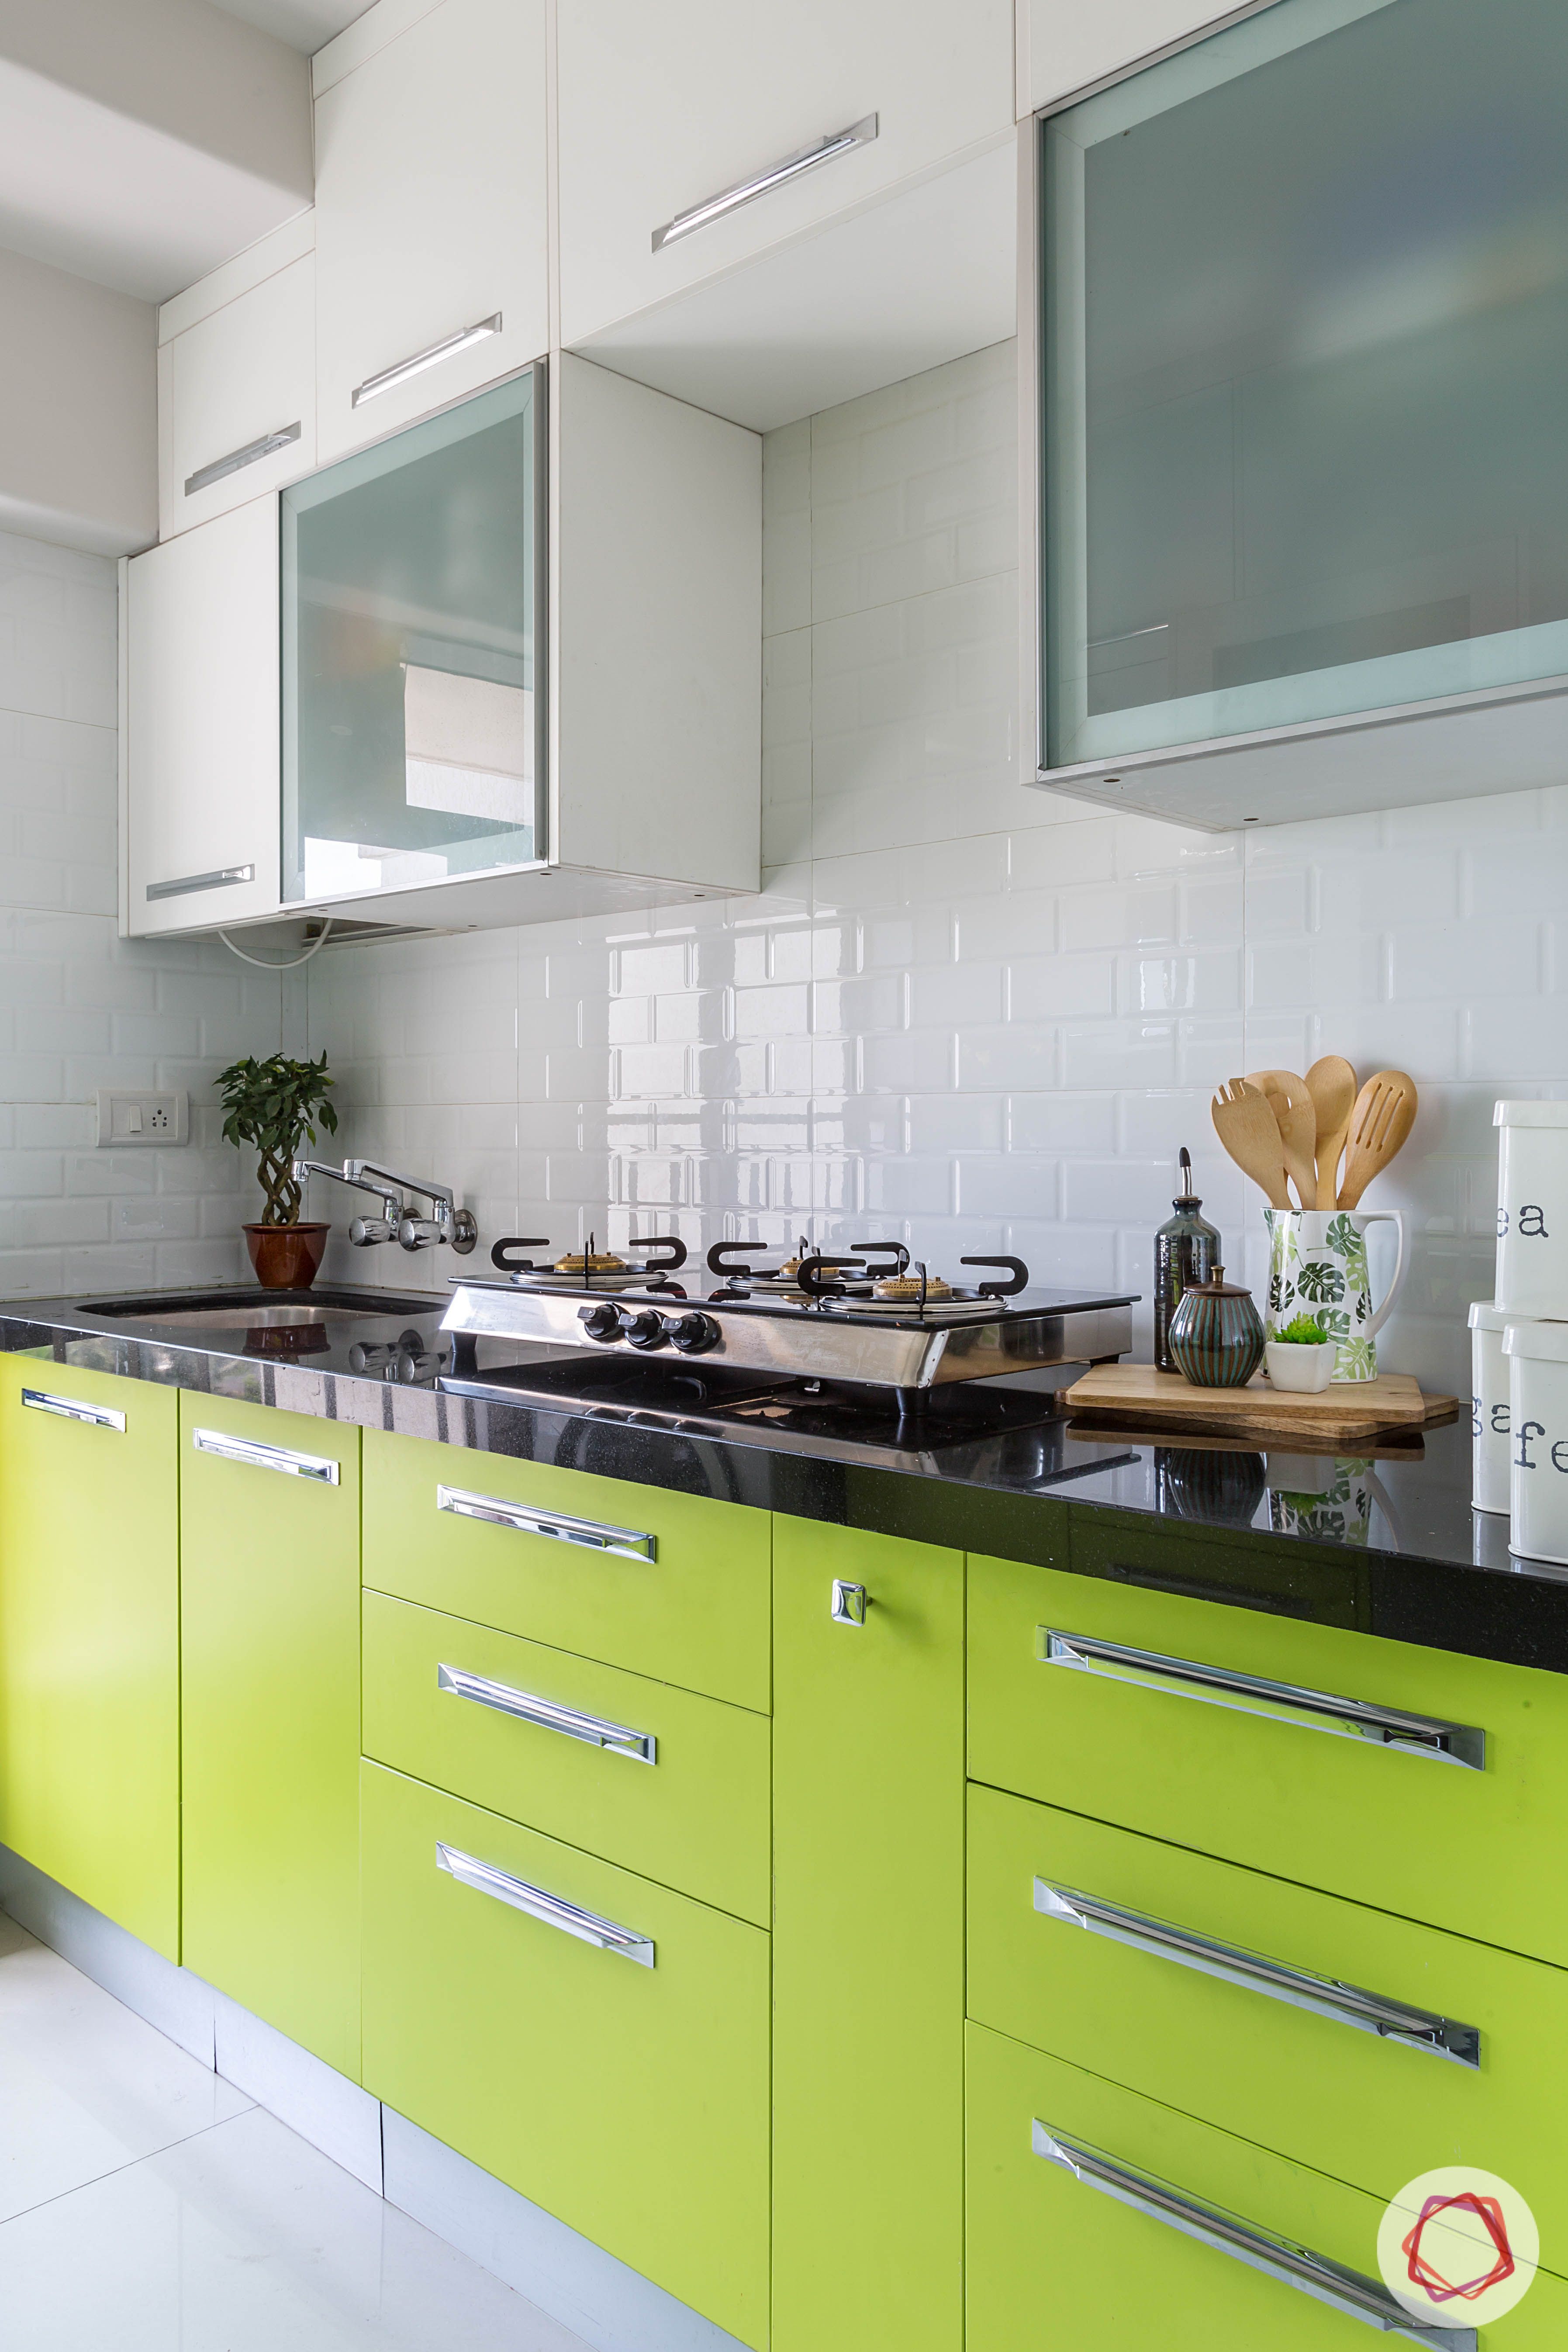 wall-tiles-design-porcelain-white-lime-green-cabinets-lofts
